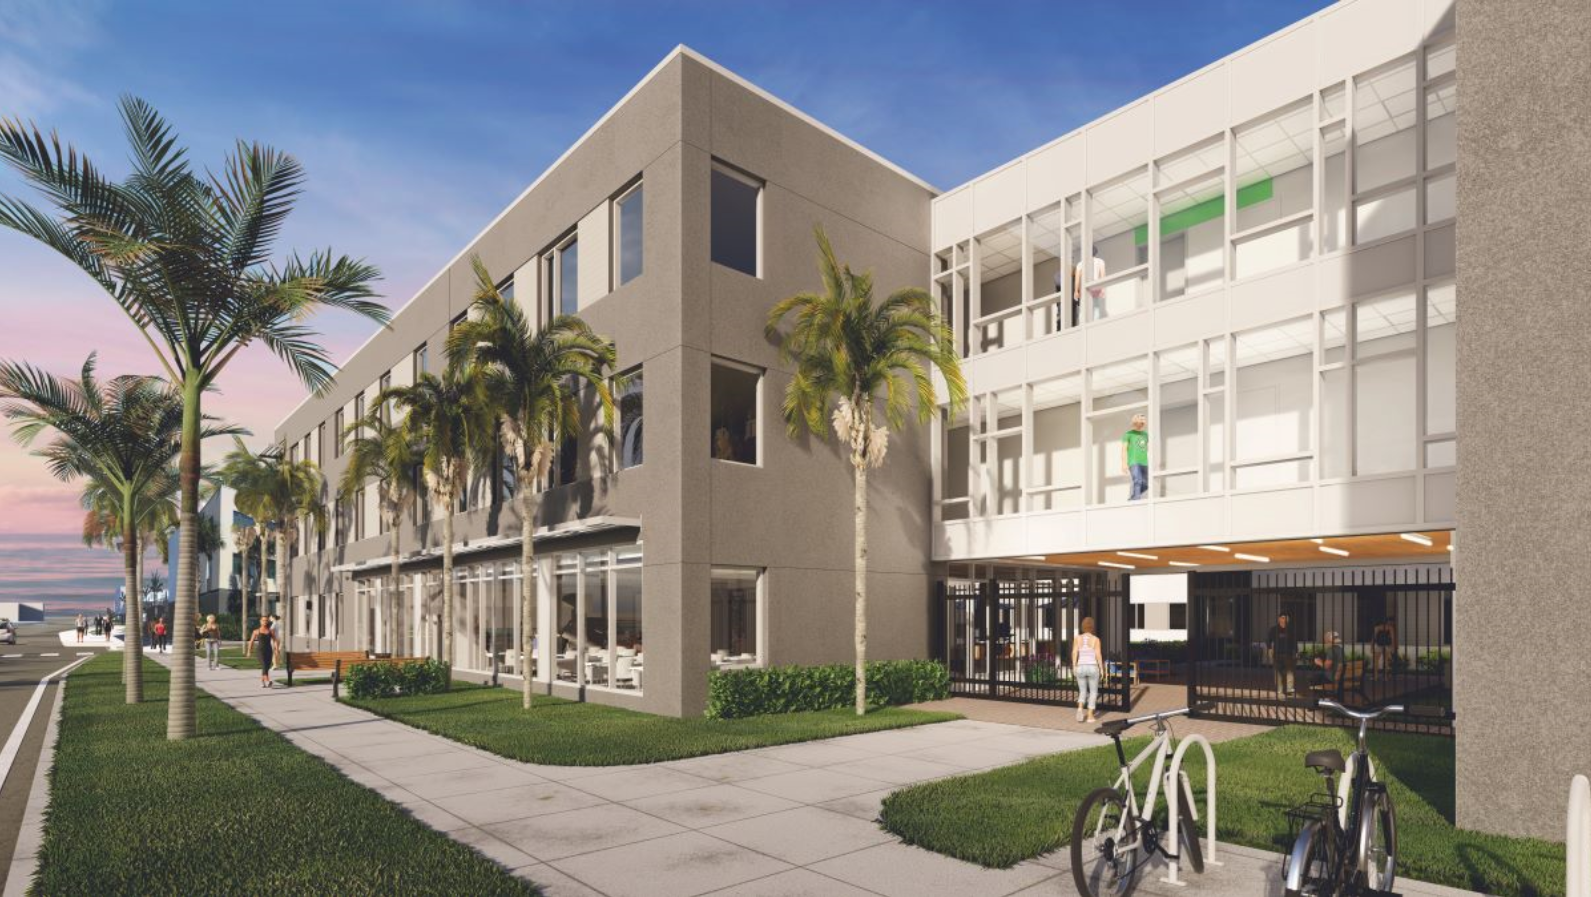 In the News...Boca Raton private university plans new